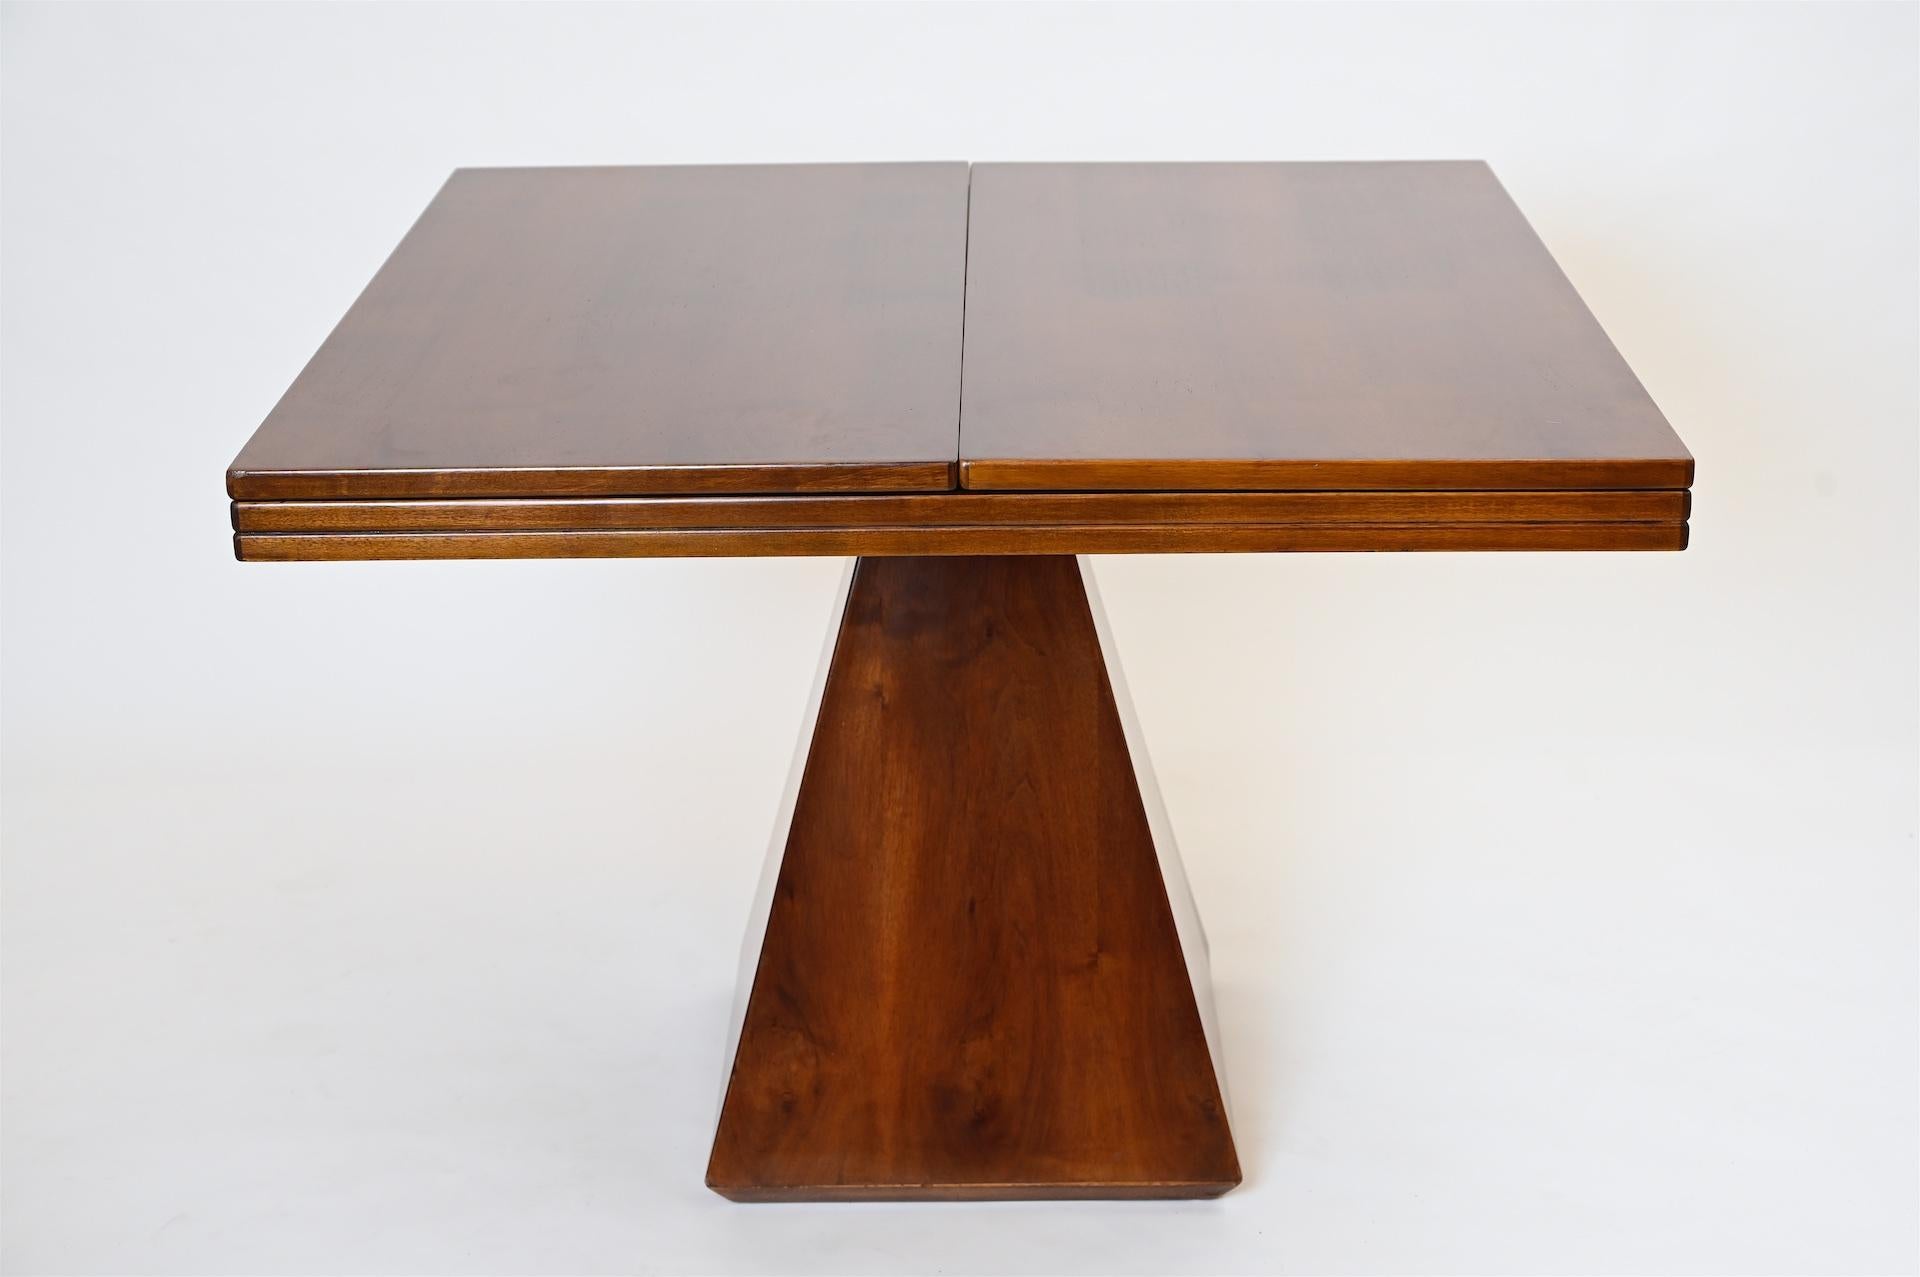 Mid-Century Modern Geometric Expanding Table in Walnut circa 1960 by Introini